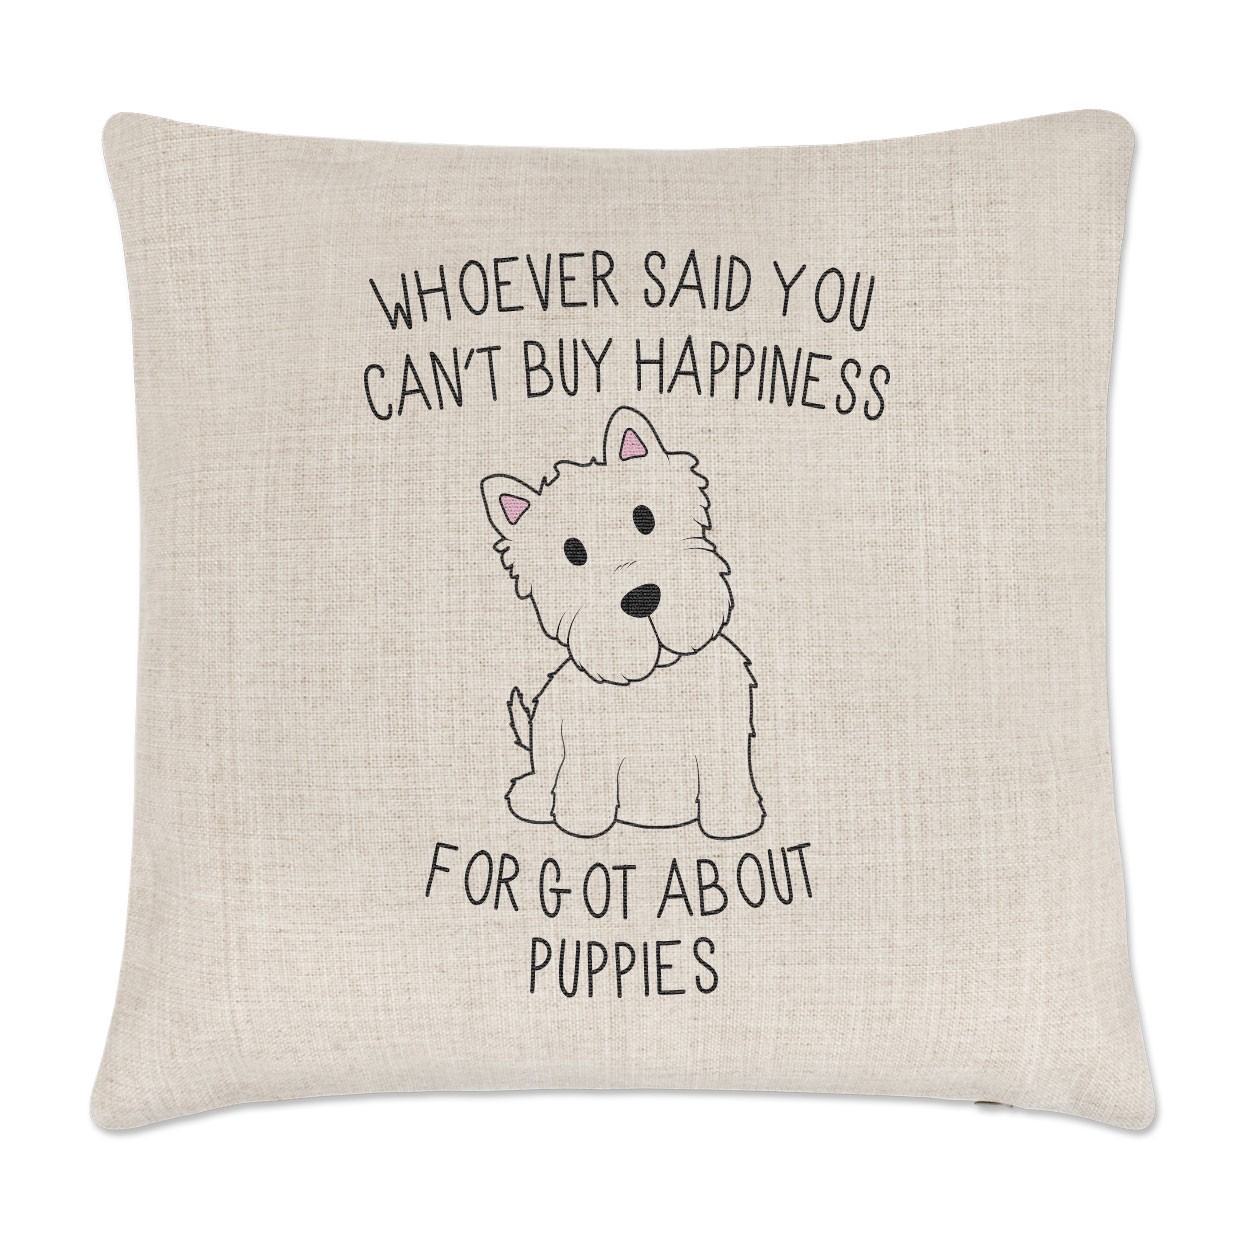 Whoever Said You Can't Buy Happiness Forgot About Puppies Linen Cushion Cover